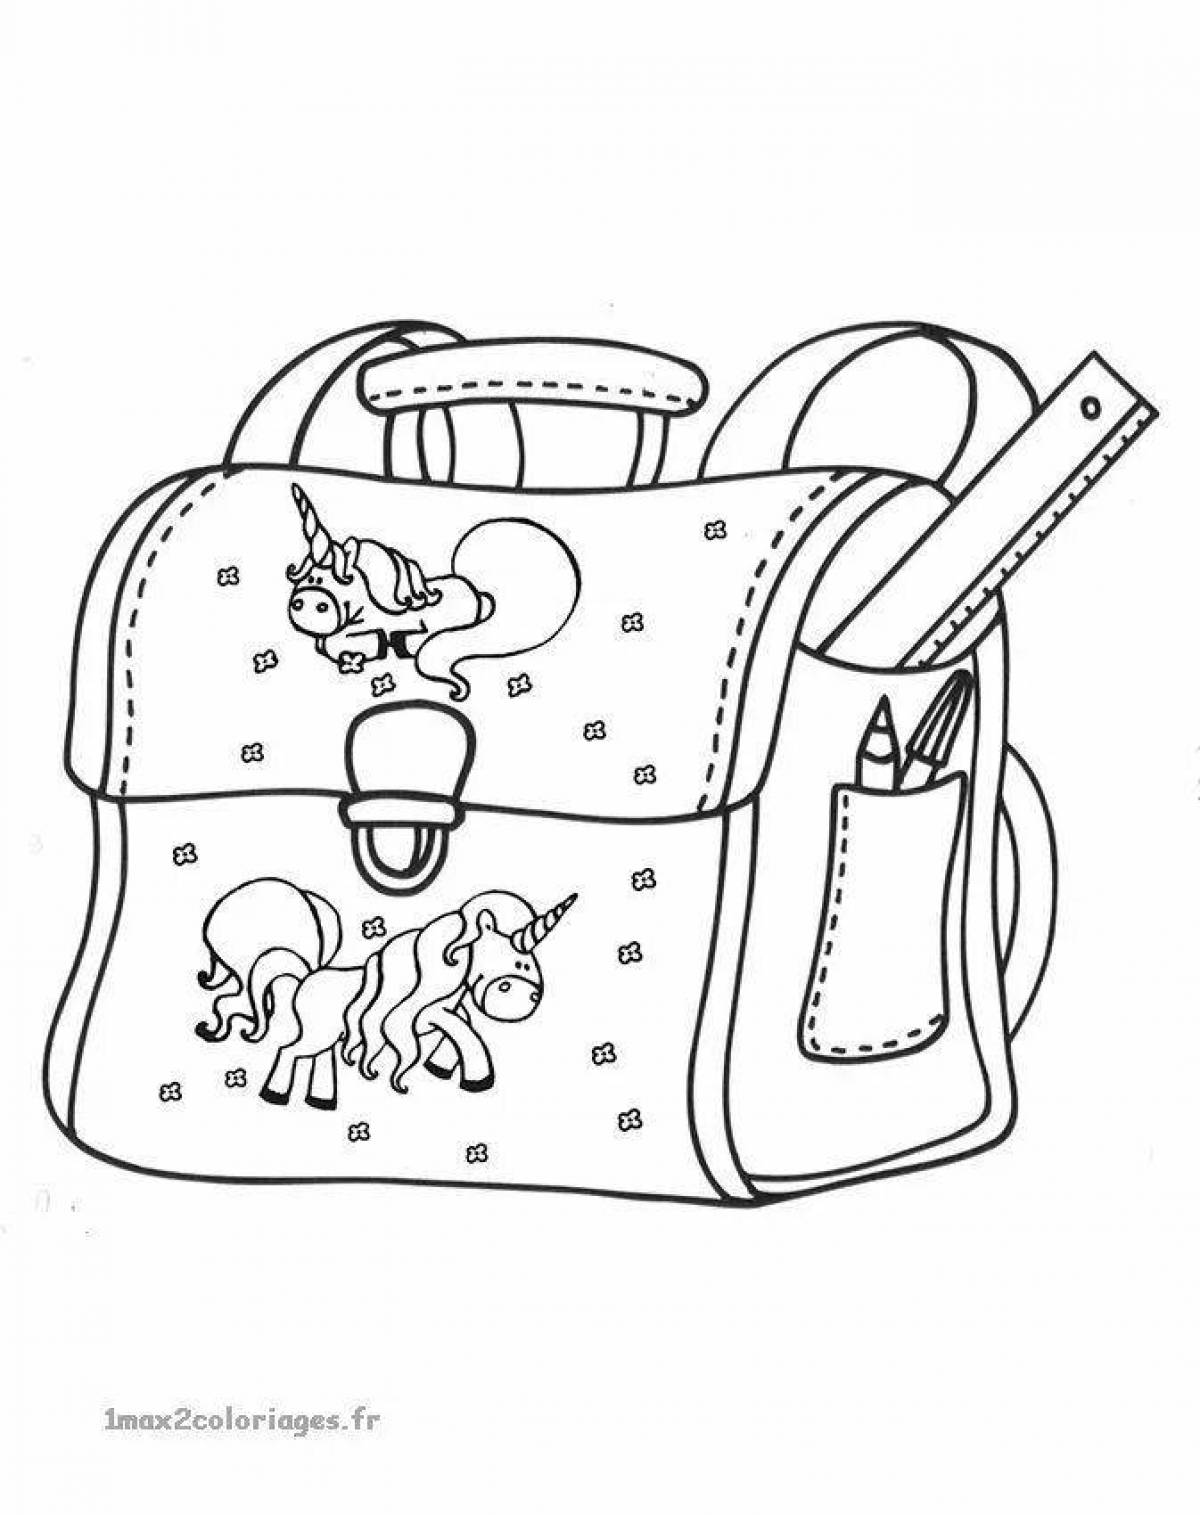 Outstanding backpack coloring for kids